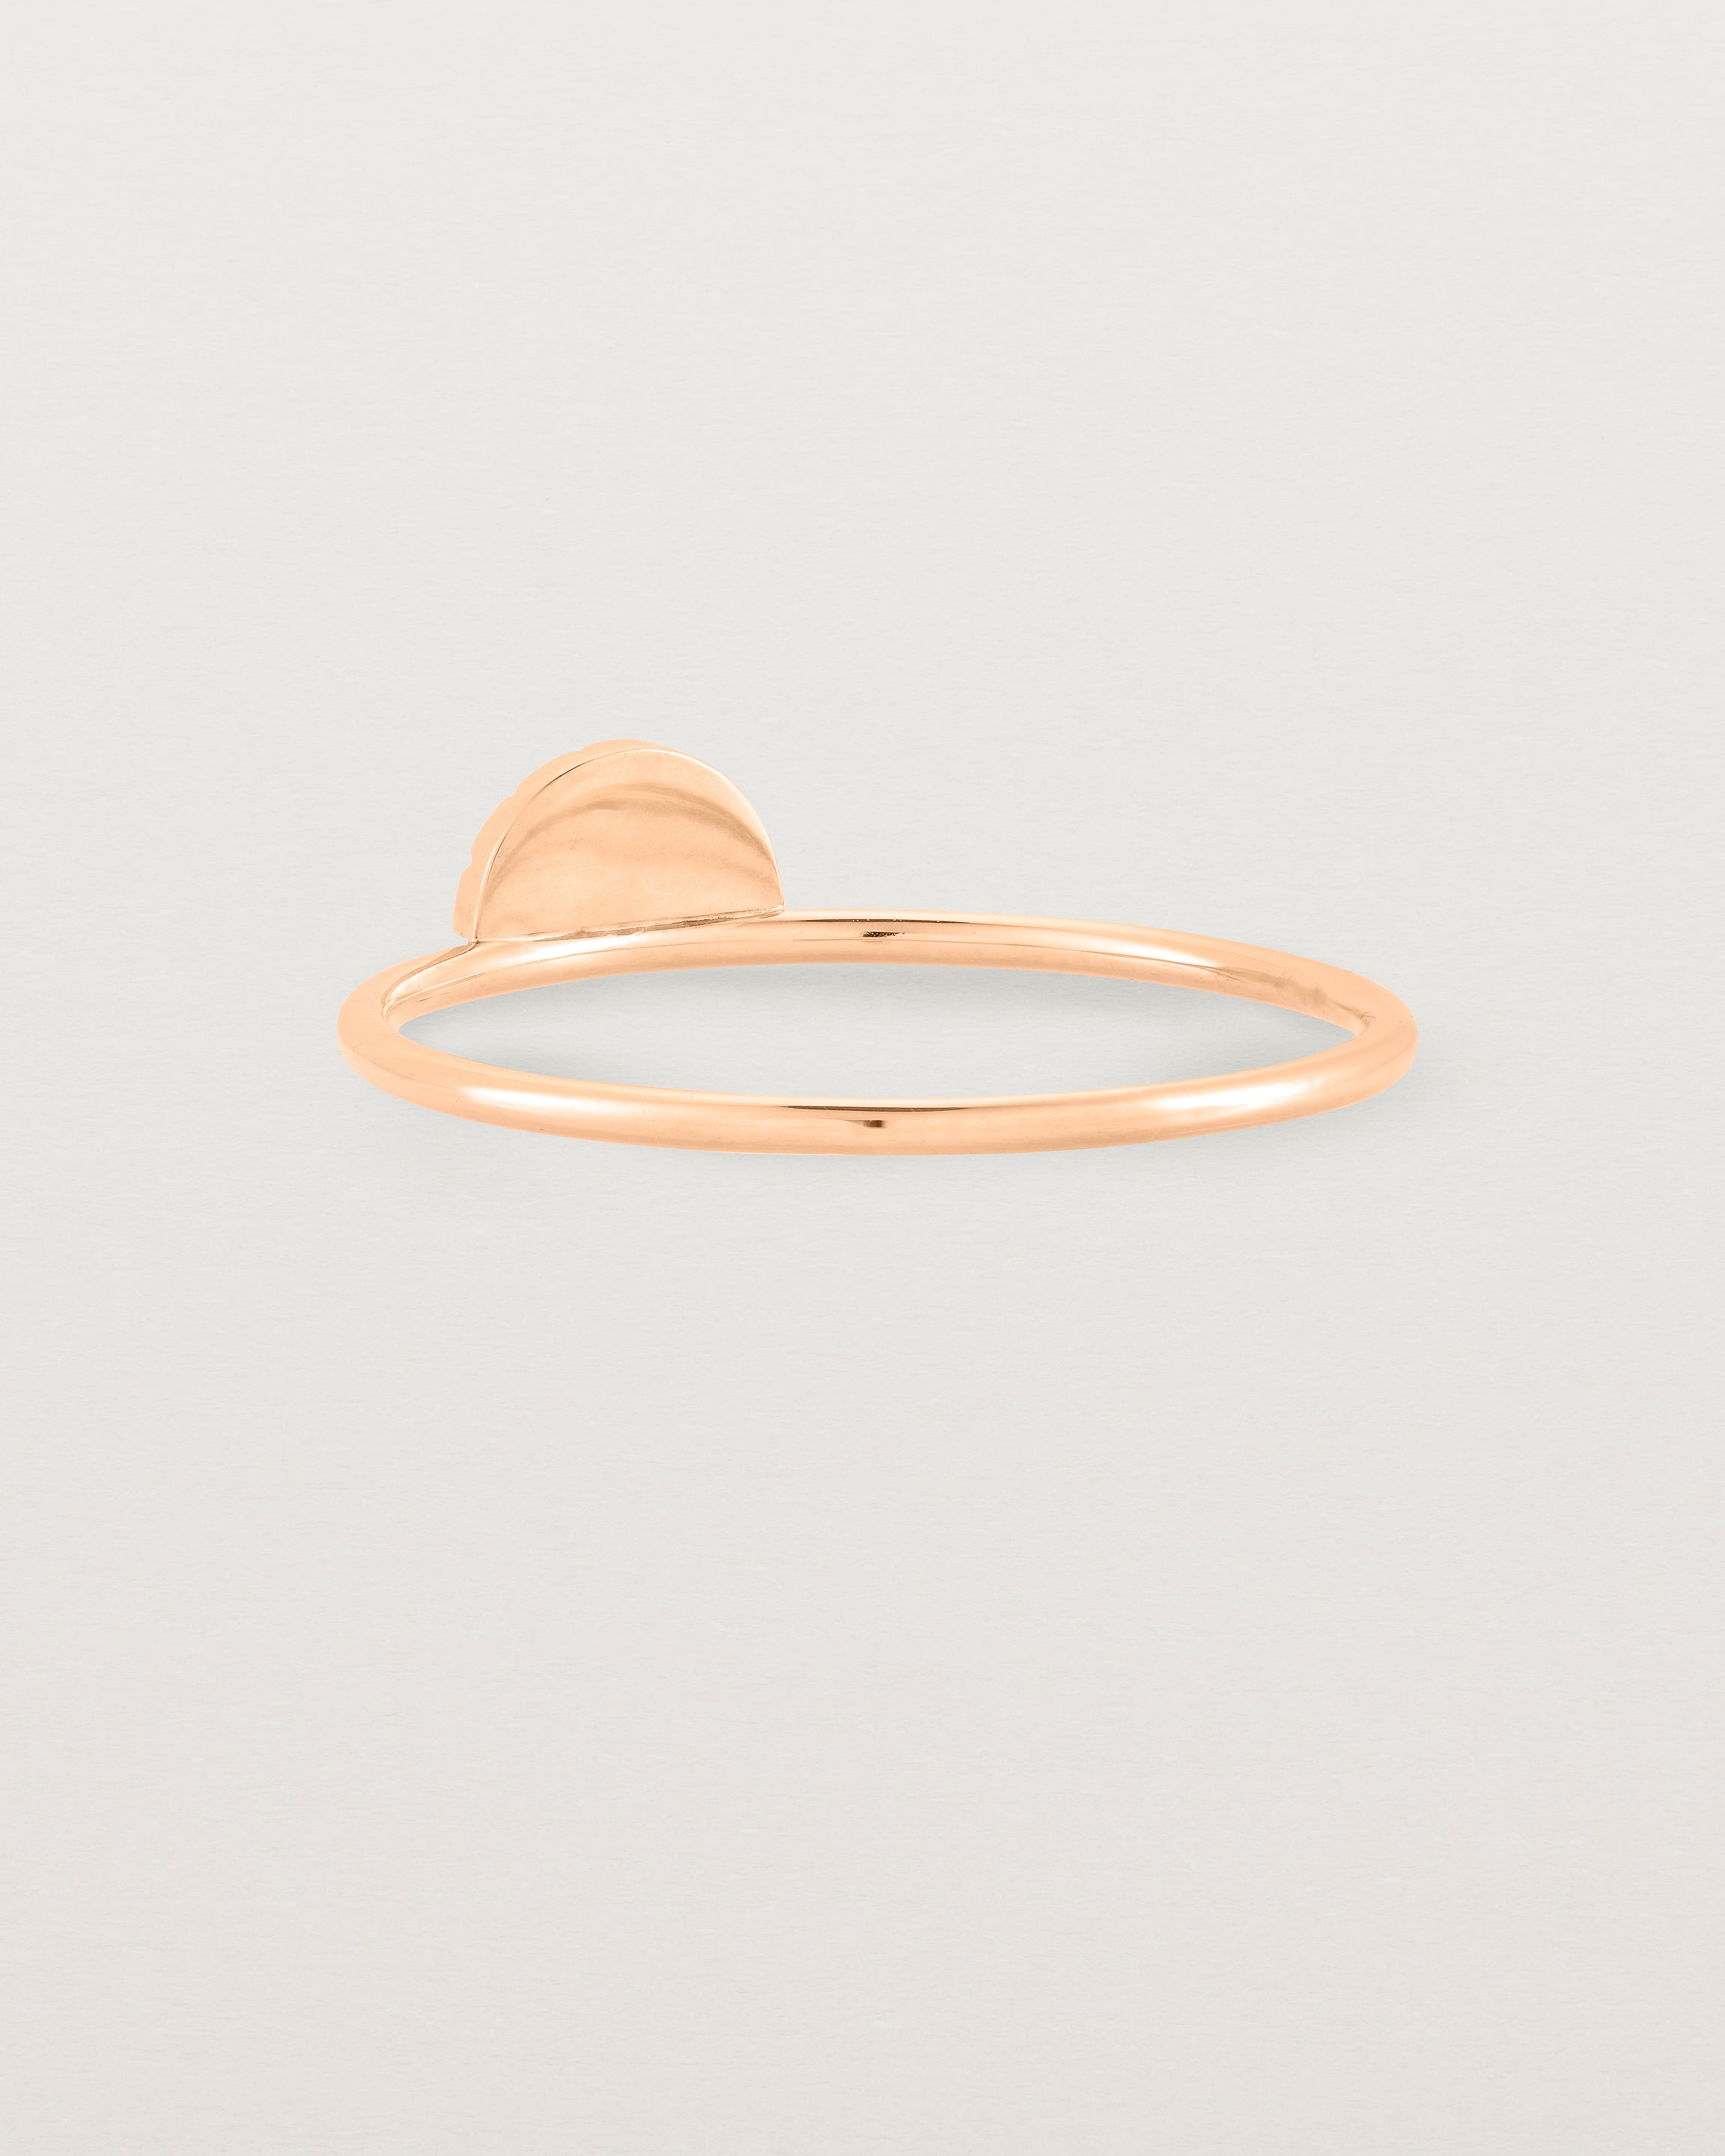 Back view of the Jia Ring in Rose Gold.